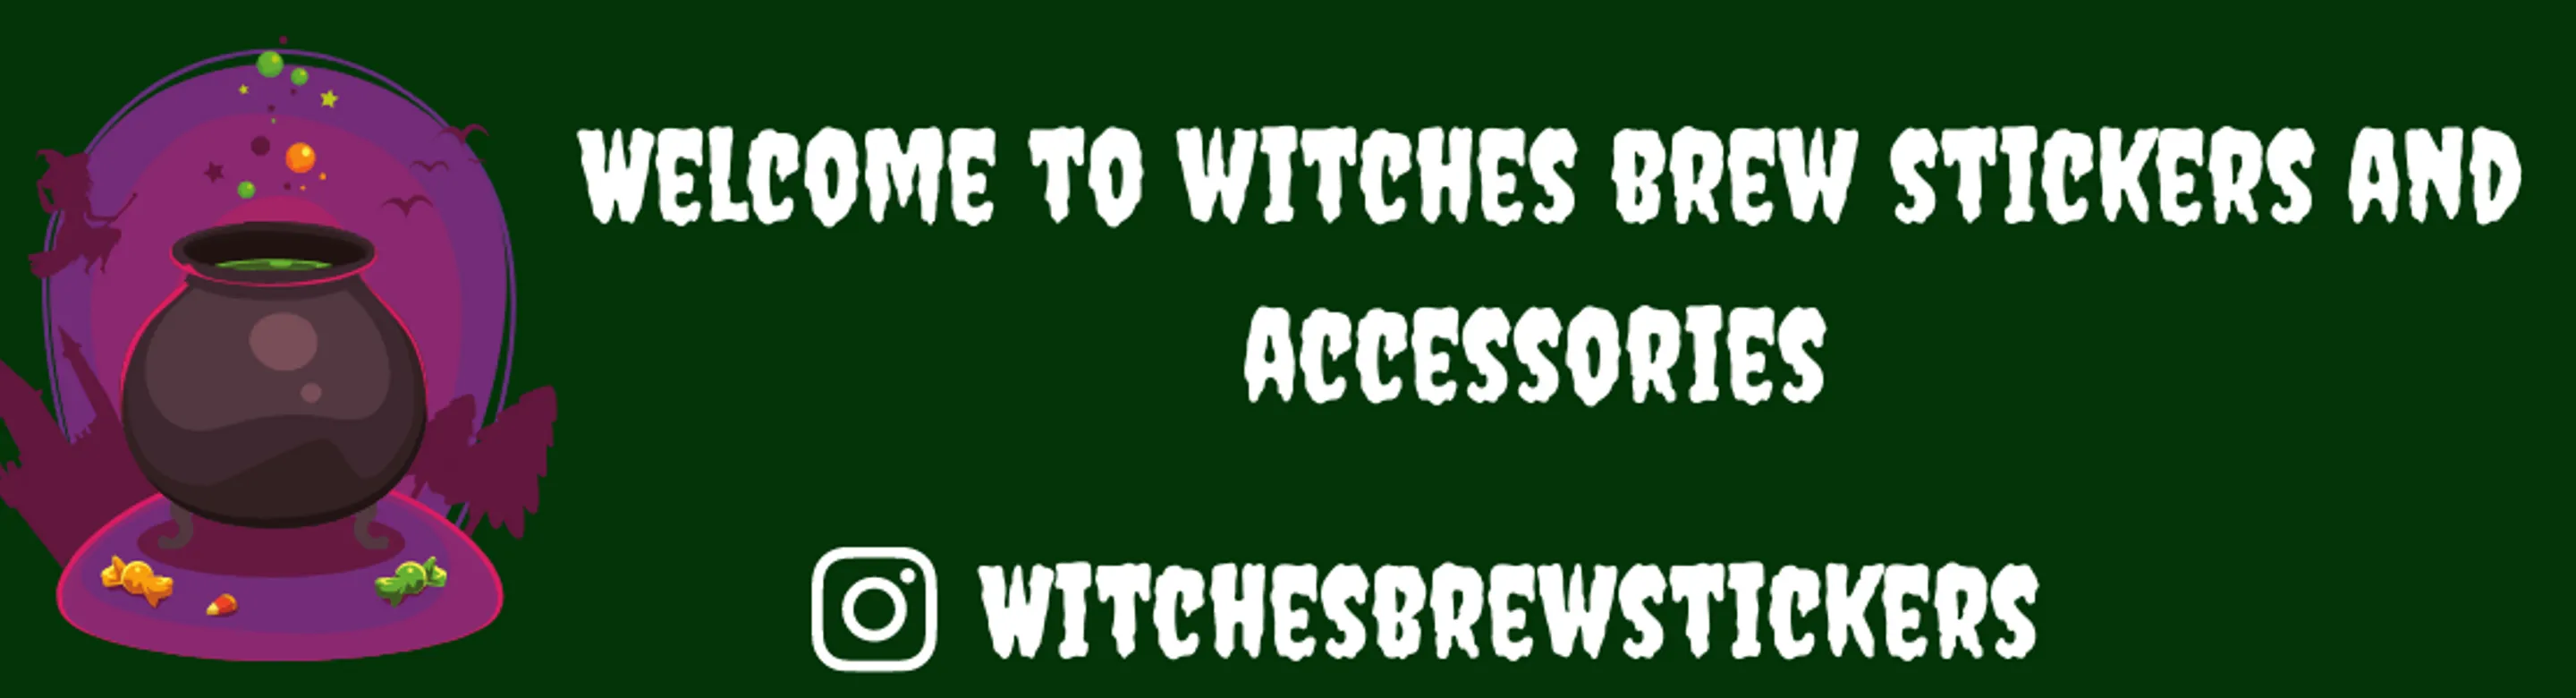 Witches Brew Stickers